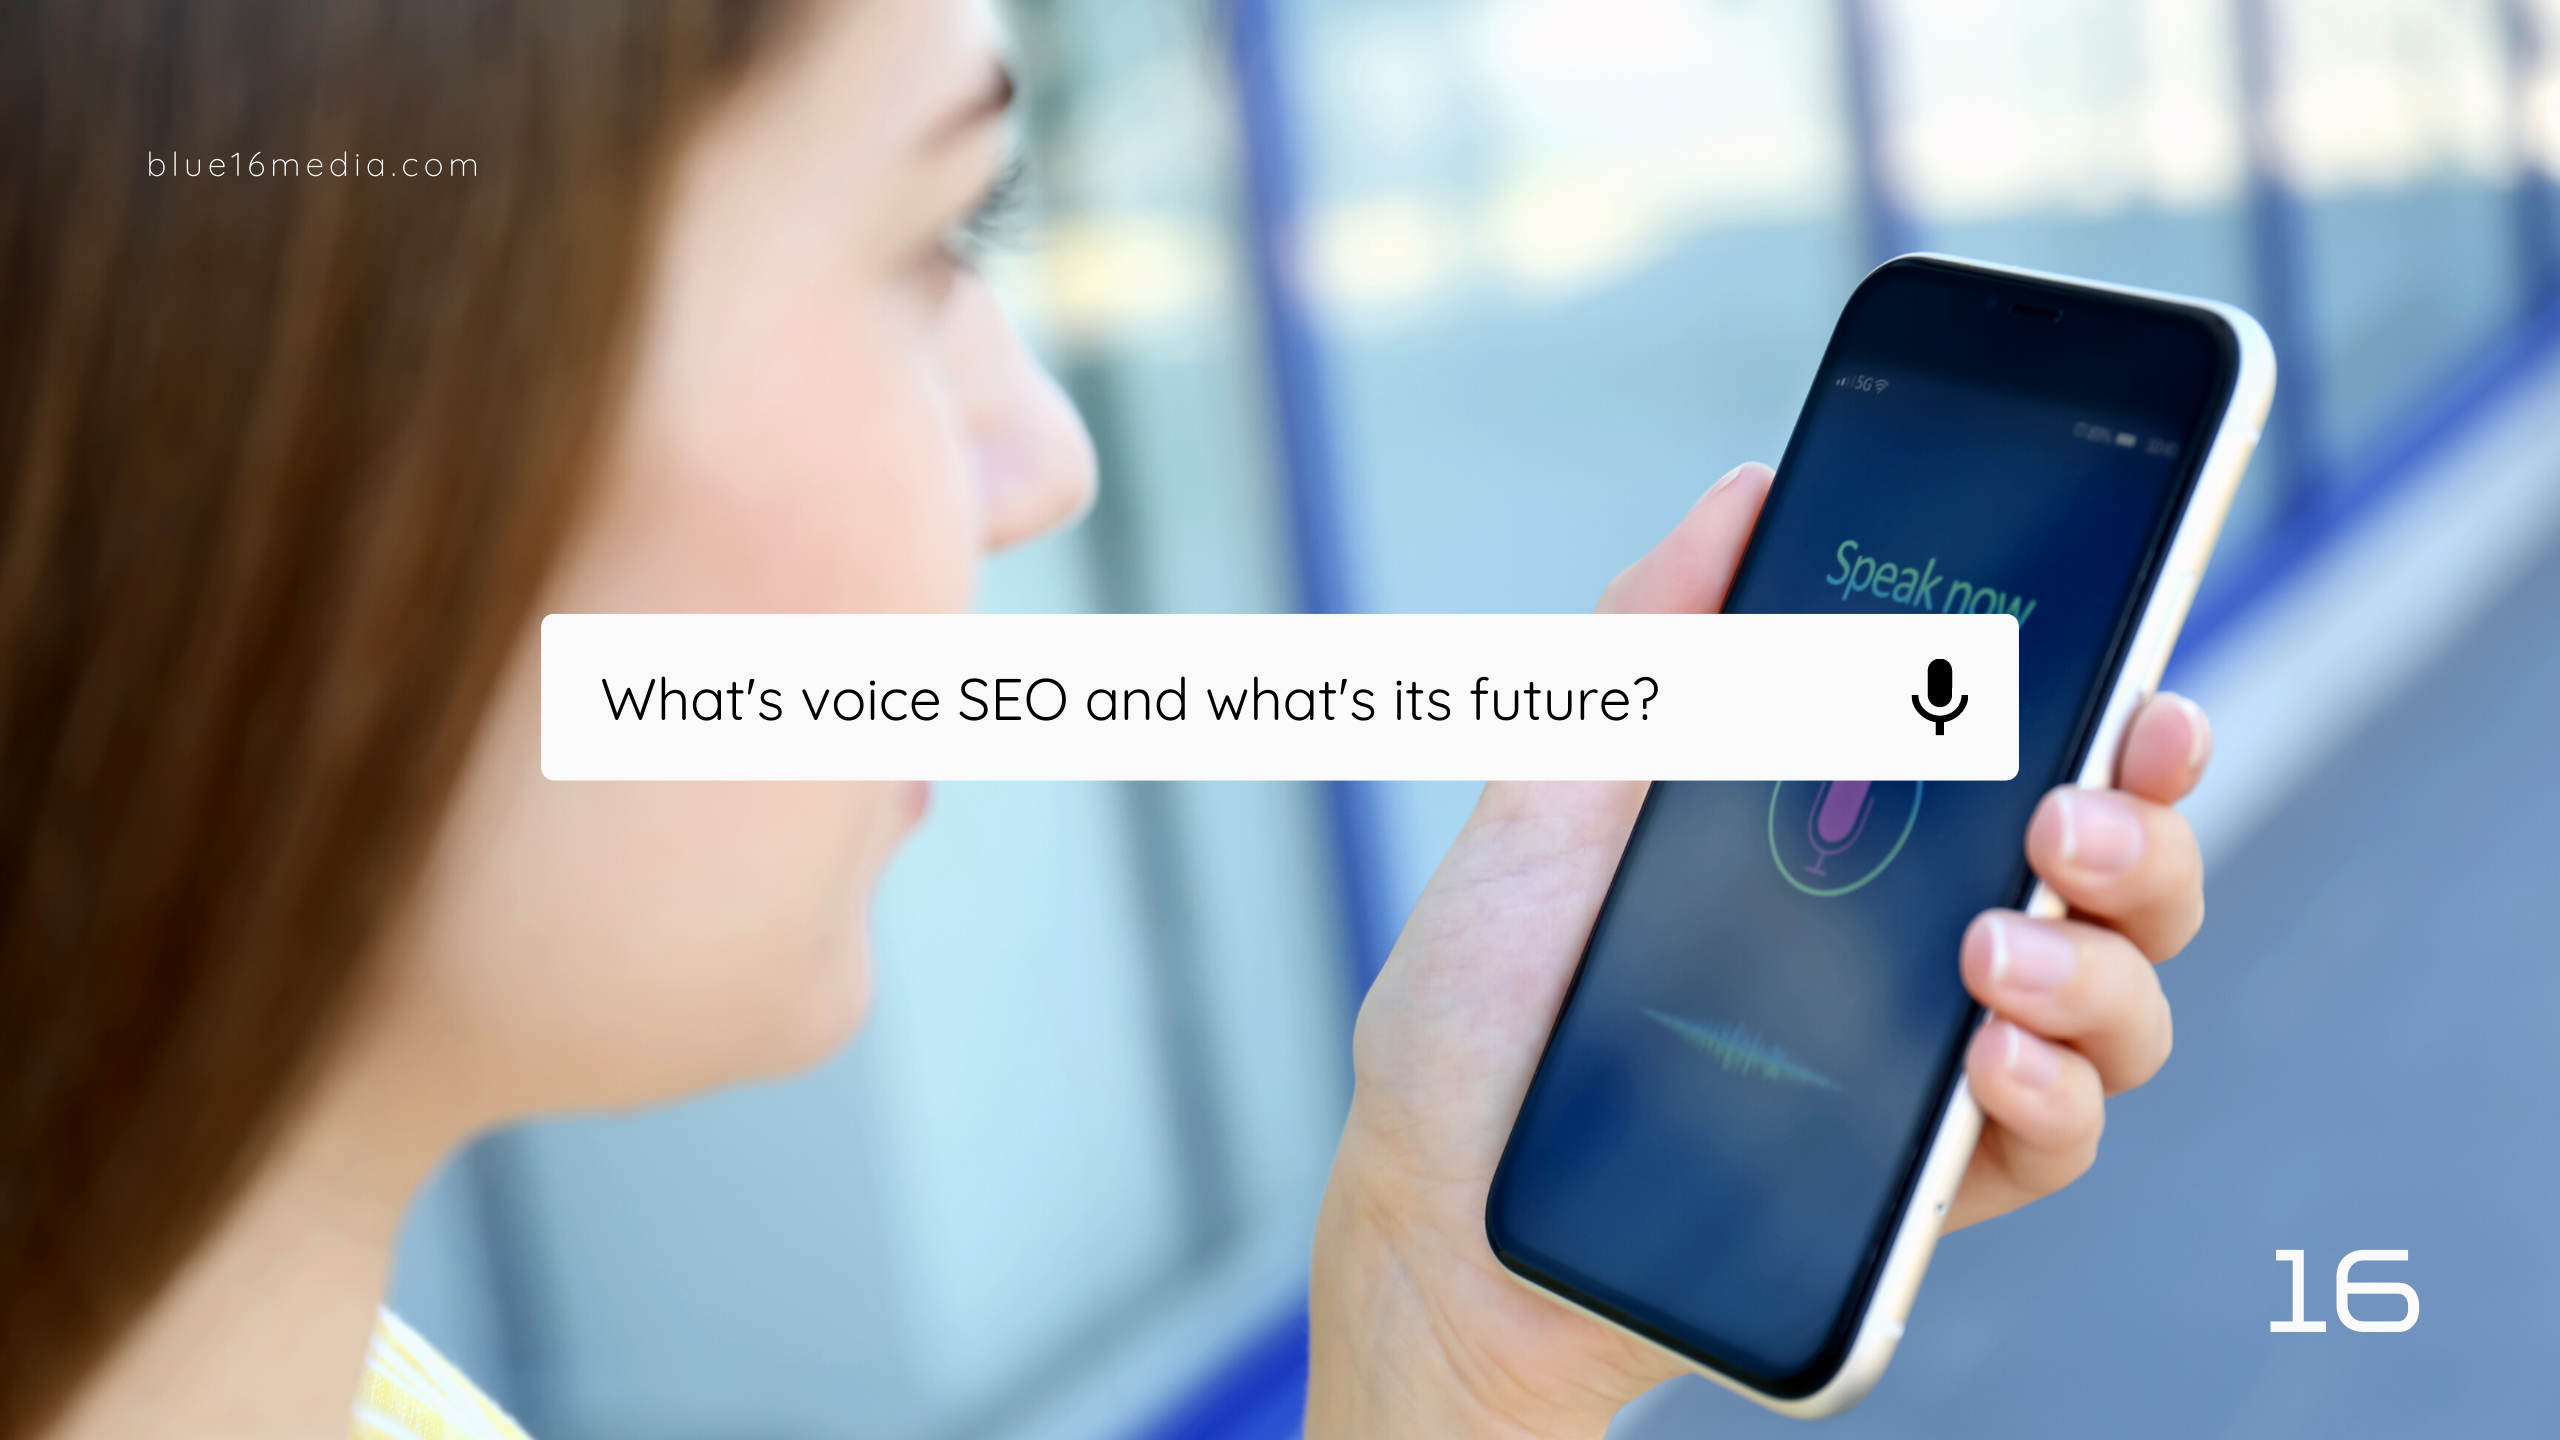 What is voice search and what's its future?